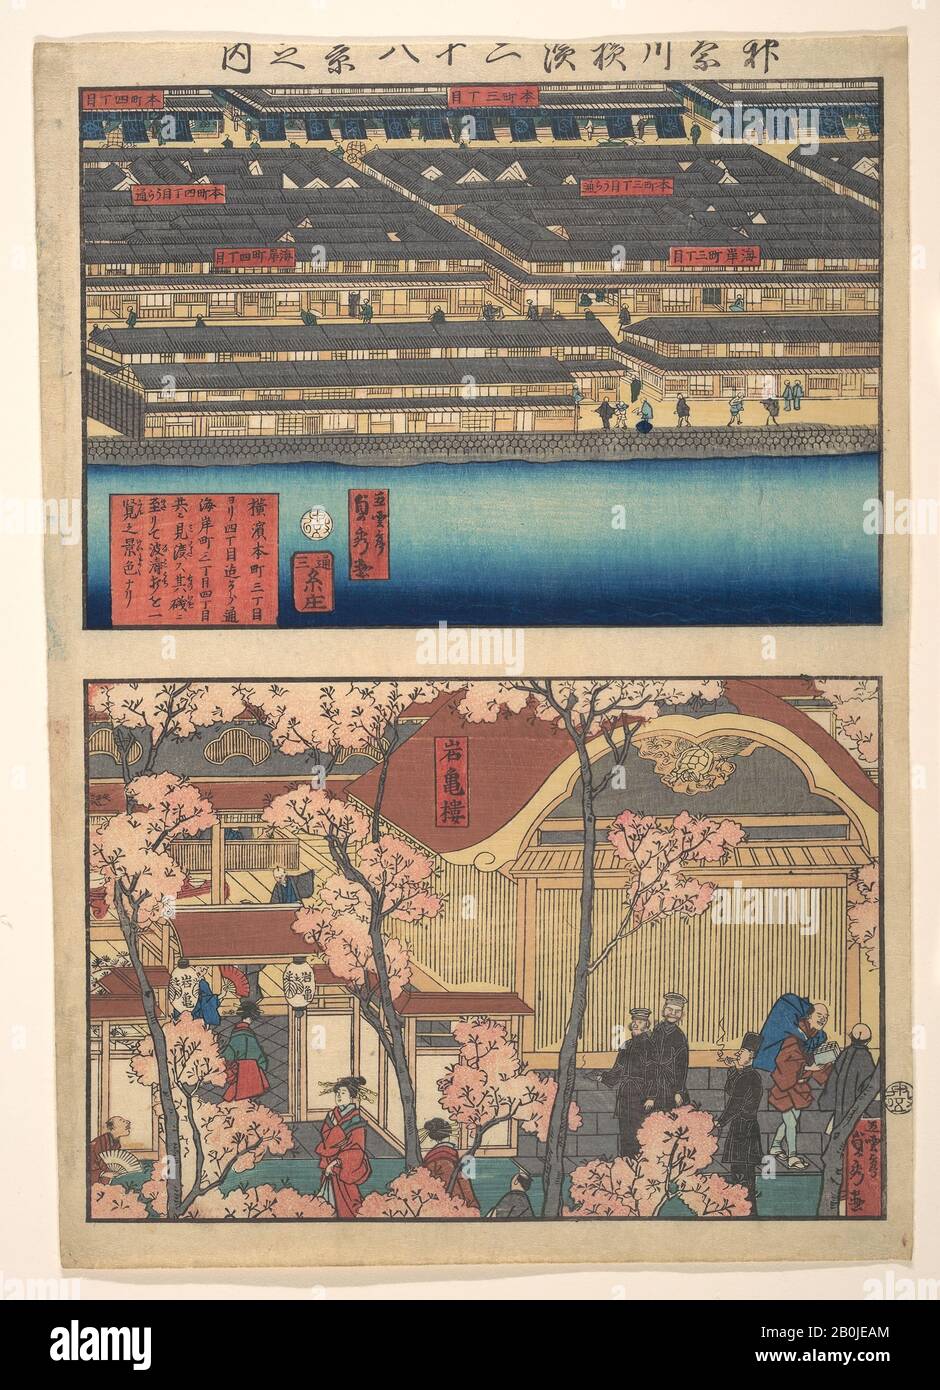 Utagawa (Gountei) Sadahide, Two Views: Waterfront at Kaigan-chō, 3-chome and 4-chome, and the Entrance to the Gankirō Tea House, Japan, Edo period (1615–1868), Utagawa (Gountei) Sadahide (Japanese, 1807–1878/79), 4th month, 1860, Japan, Polychrome woodblock print; ink and color on paper, Image: 14 1/2 x 10 1/8 in. (36.8 x 25.7 cm), Prints Stock Photo